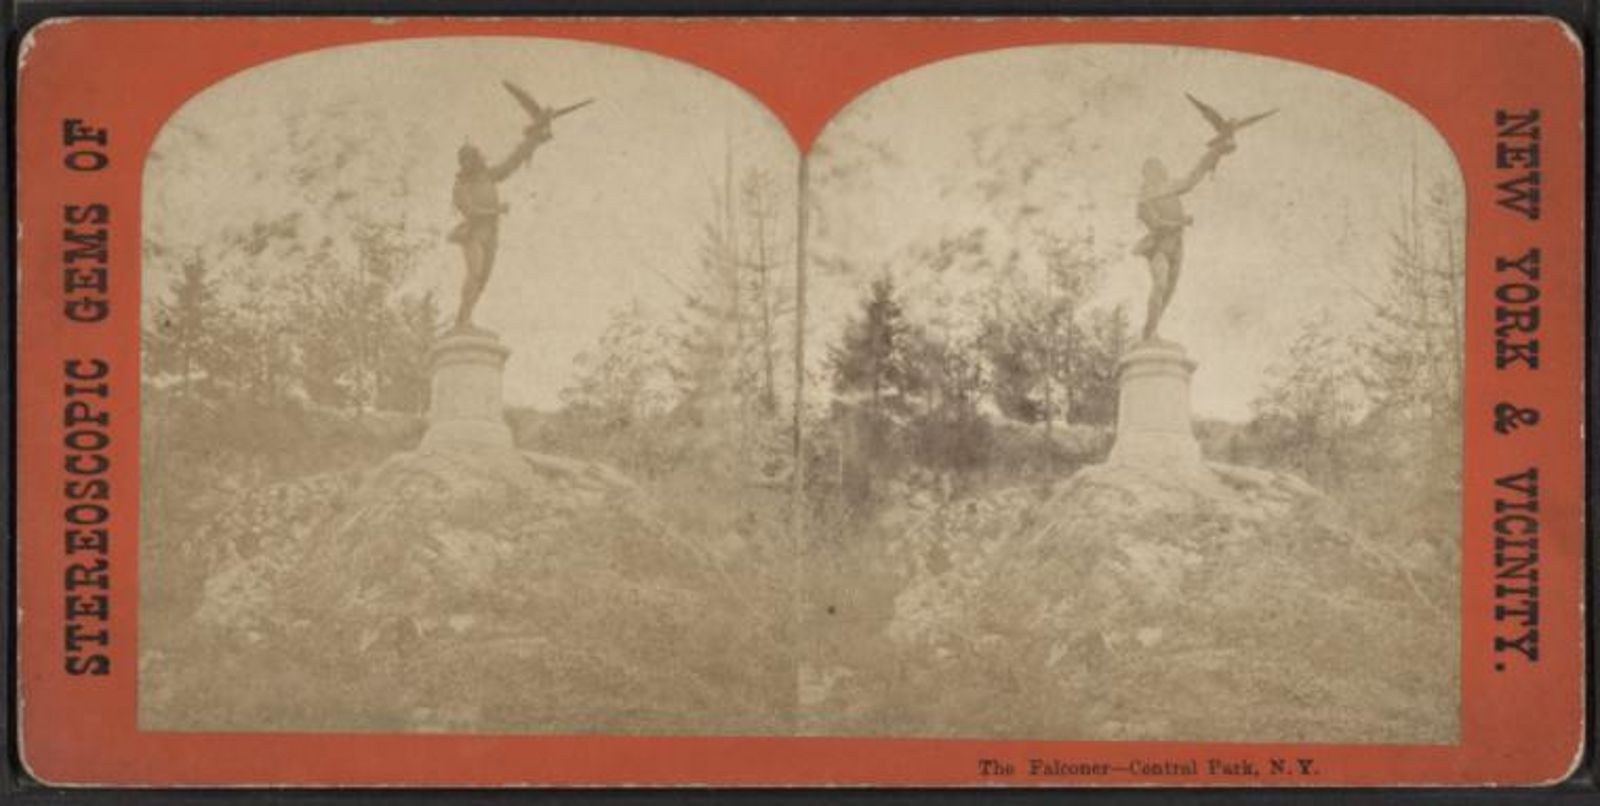 An archival stereoscopic card—two identical images of a statue of a man with outstretched arm on which a falcon is landing.